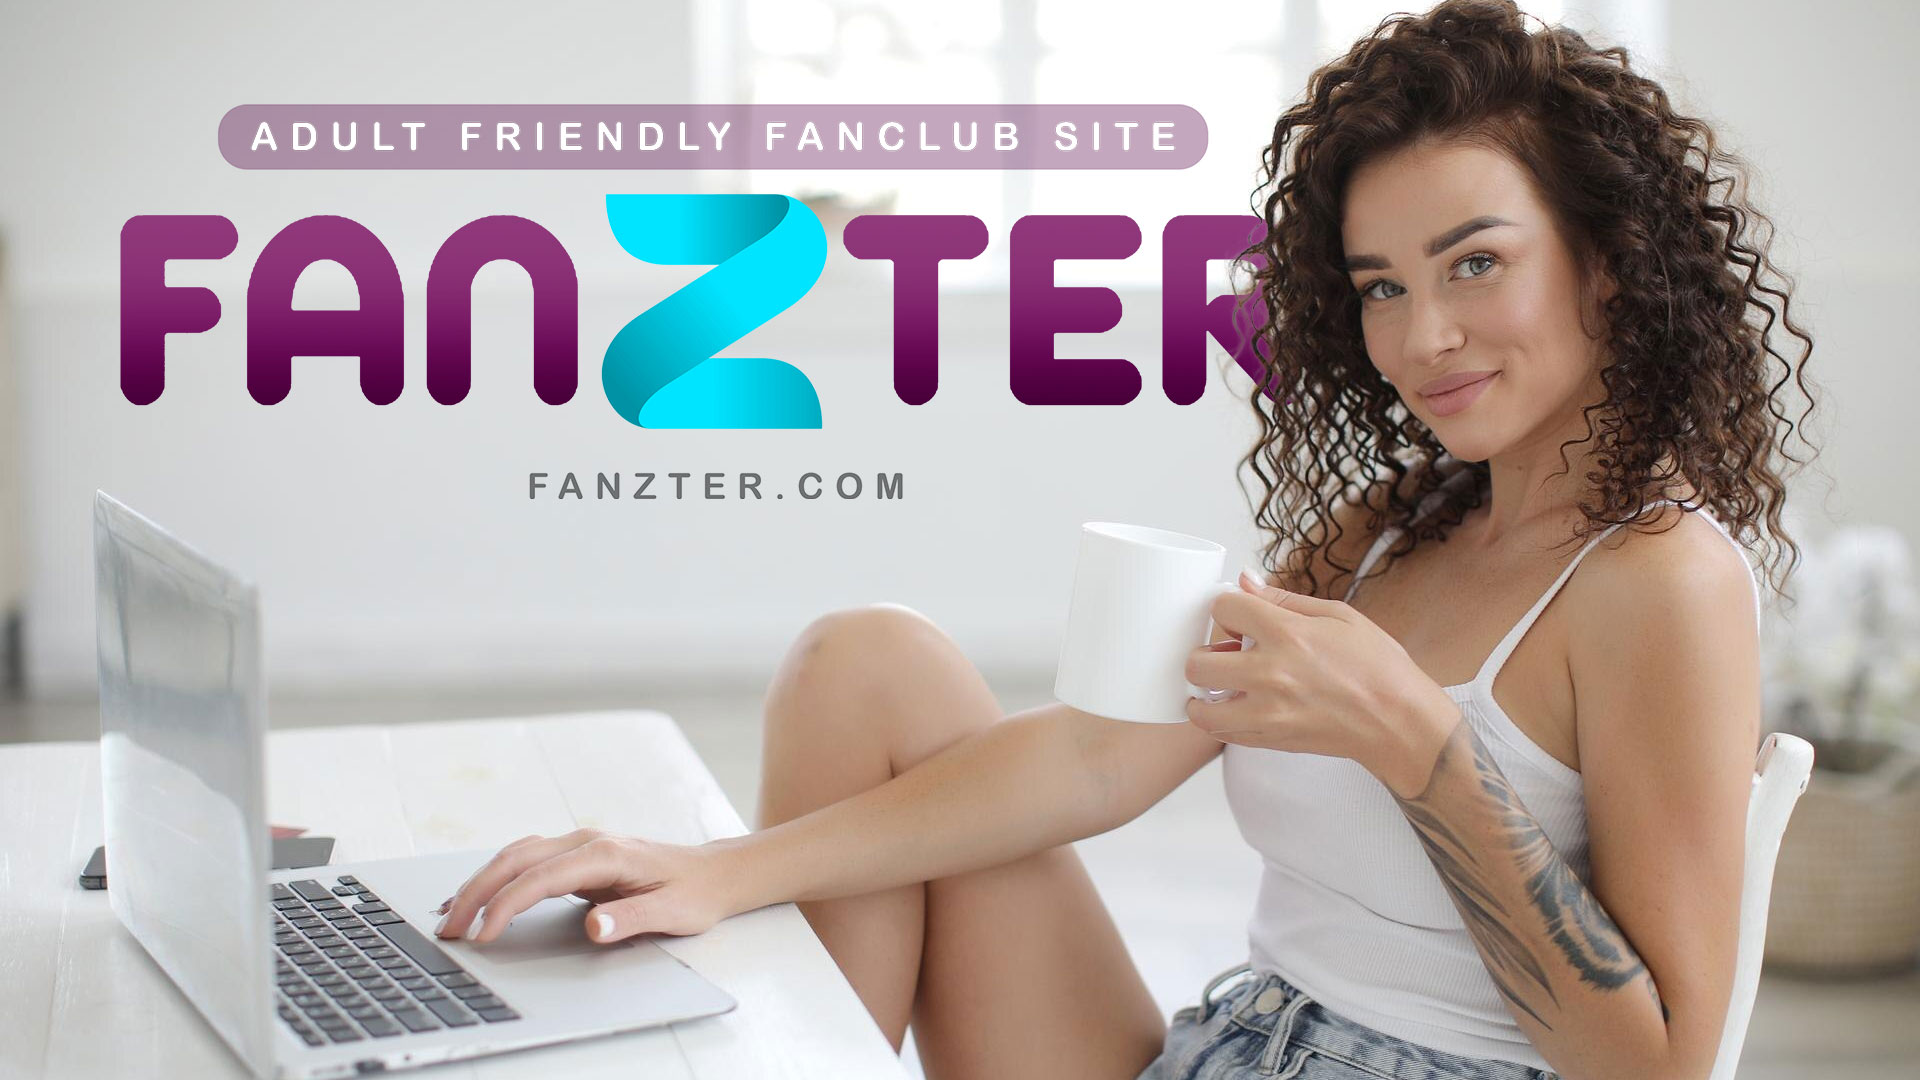 Fanzter- Adult Friendly Fan Club Site and Link in Bio Site